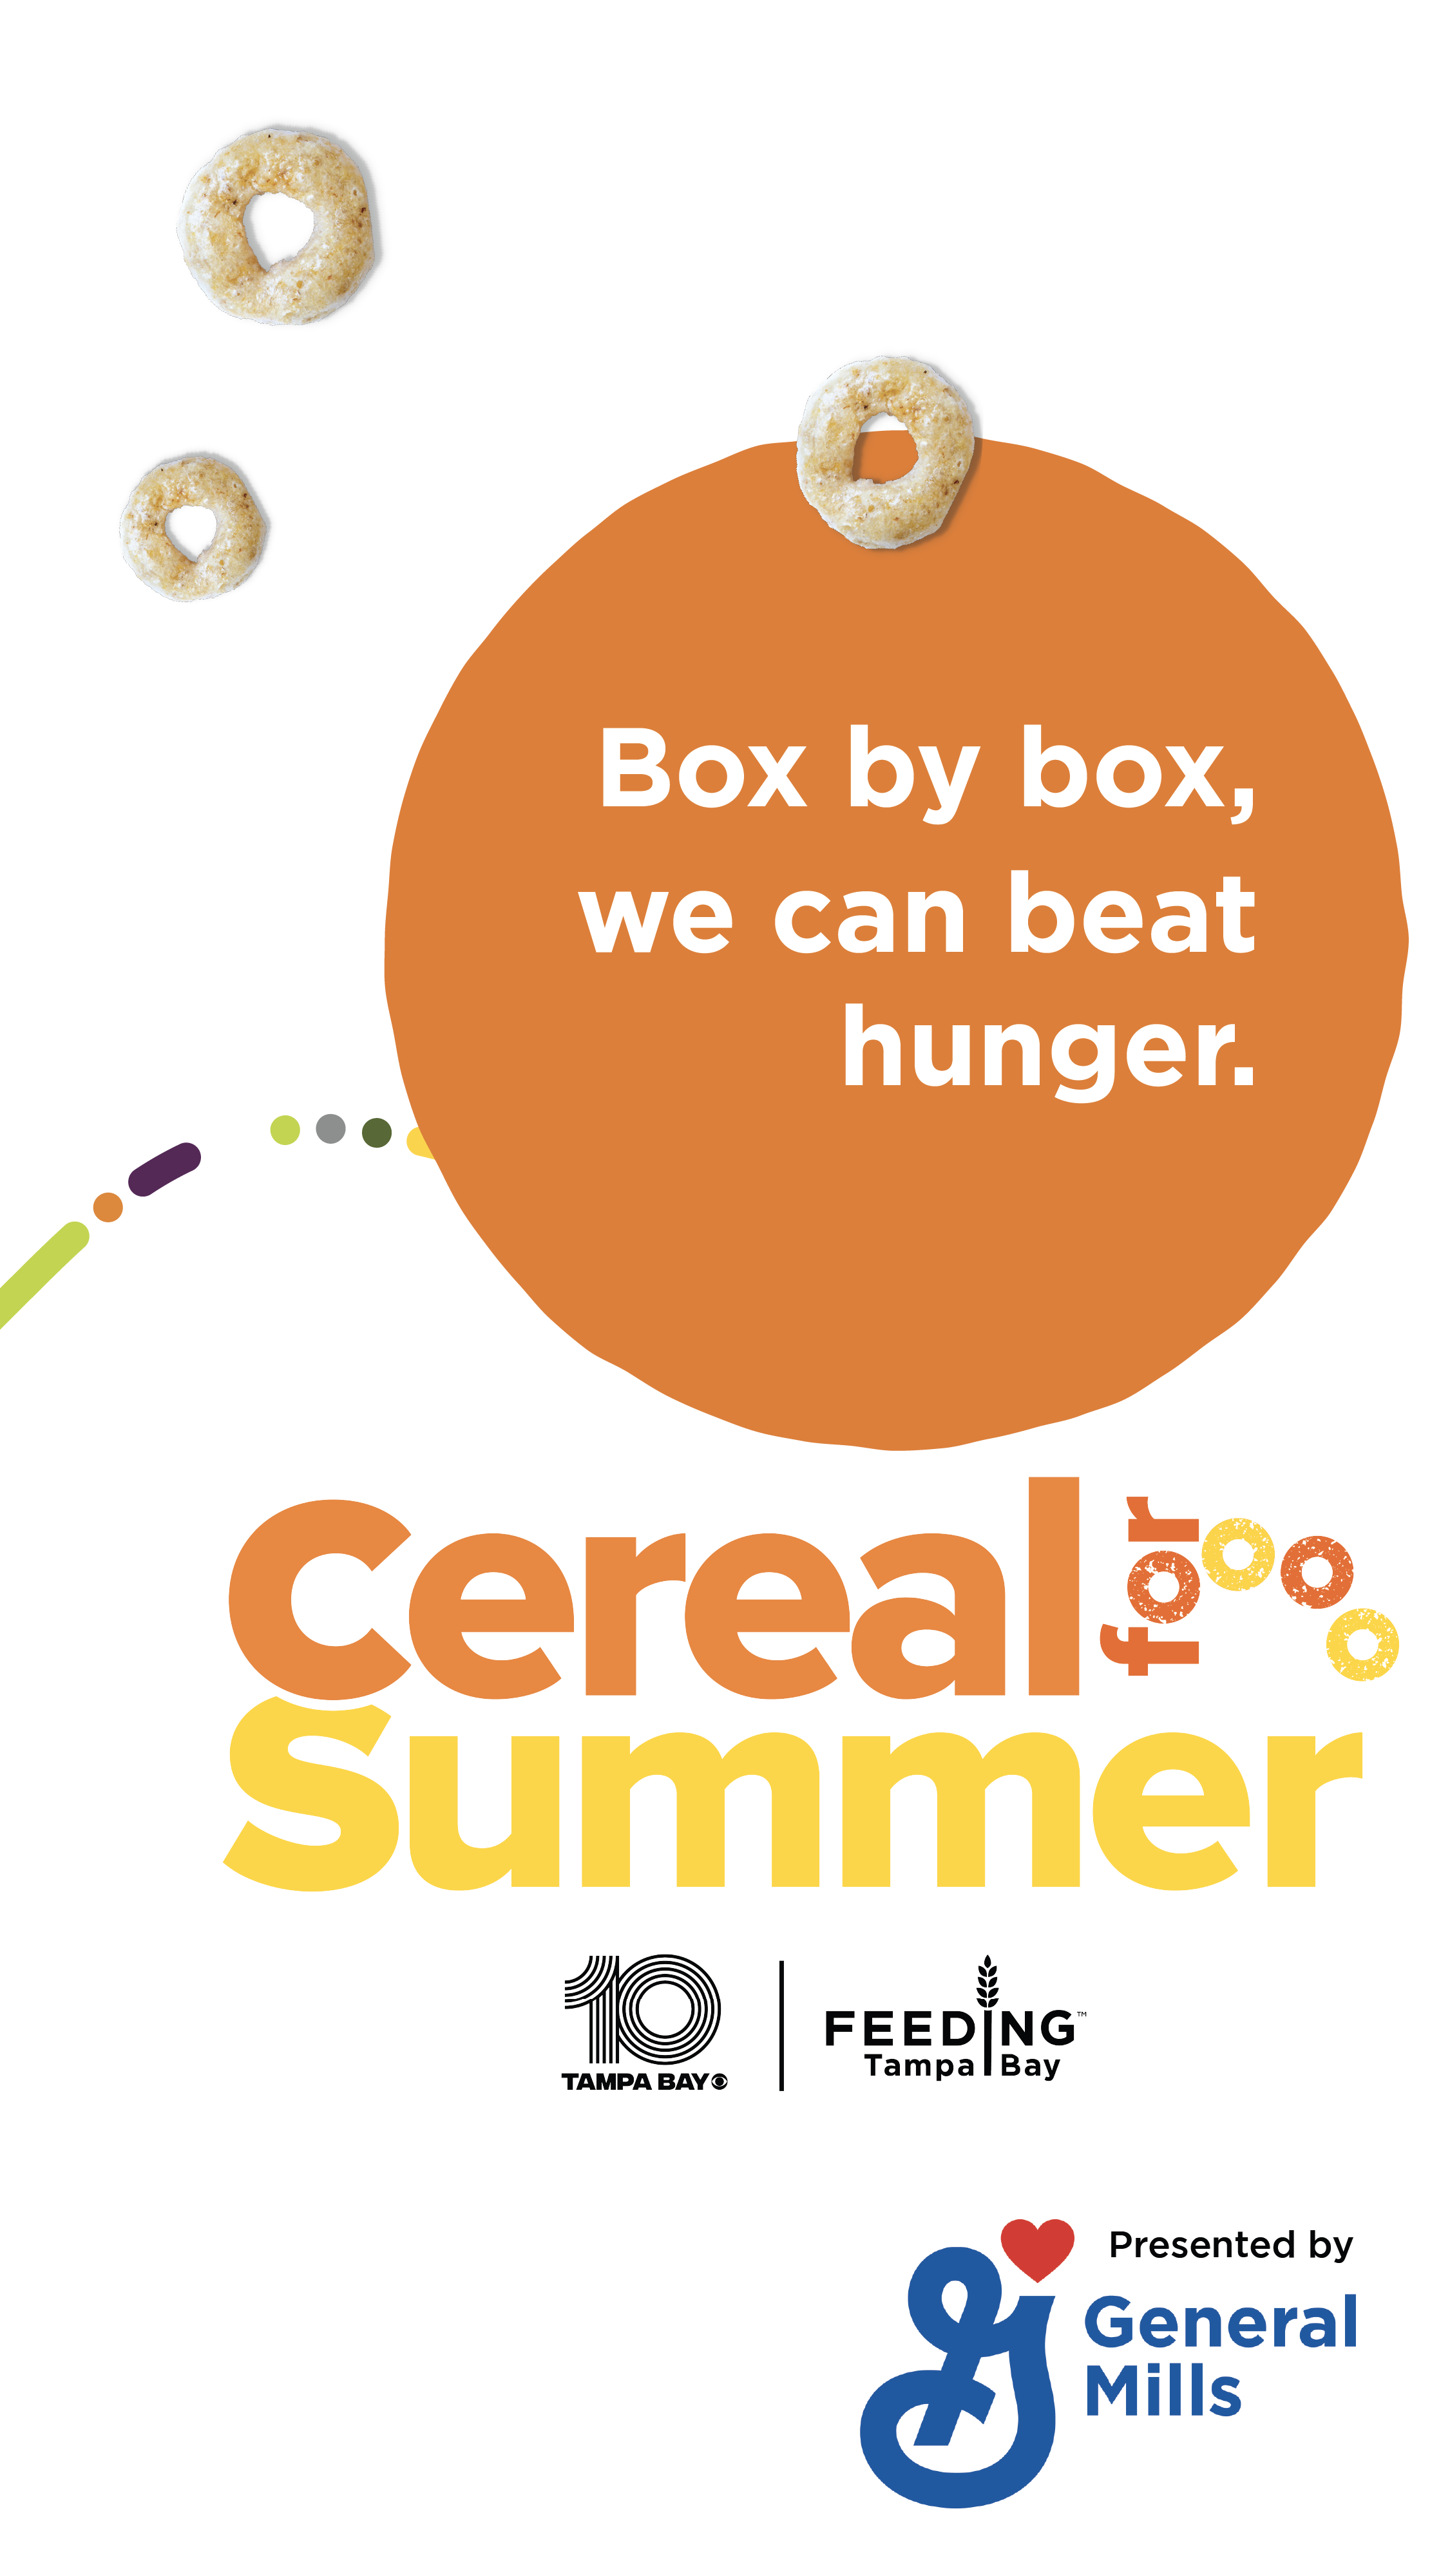 Cereal for Summer can beat hunger box by box